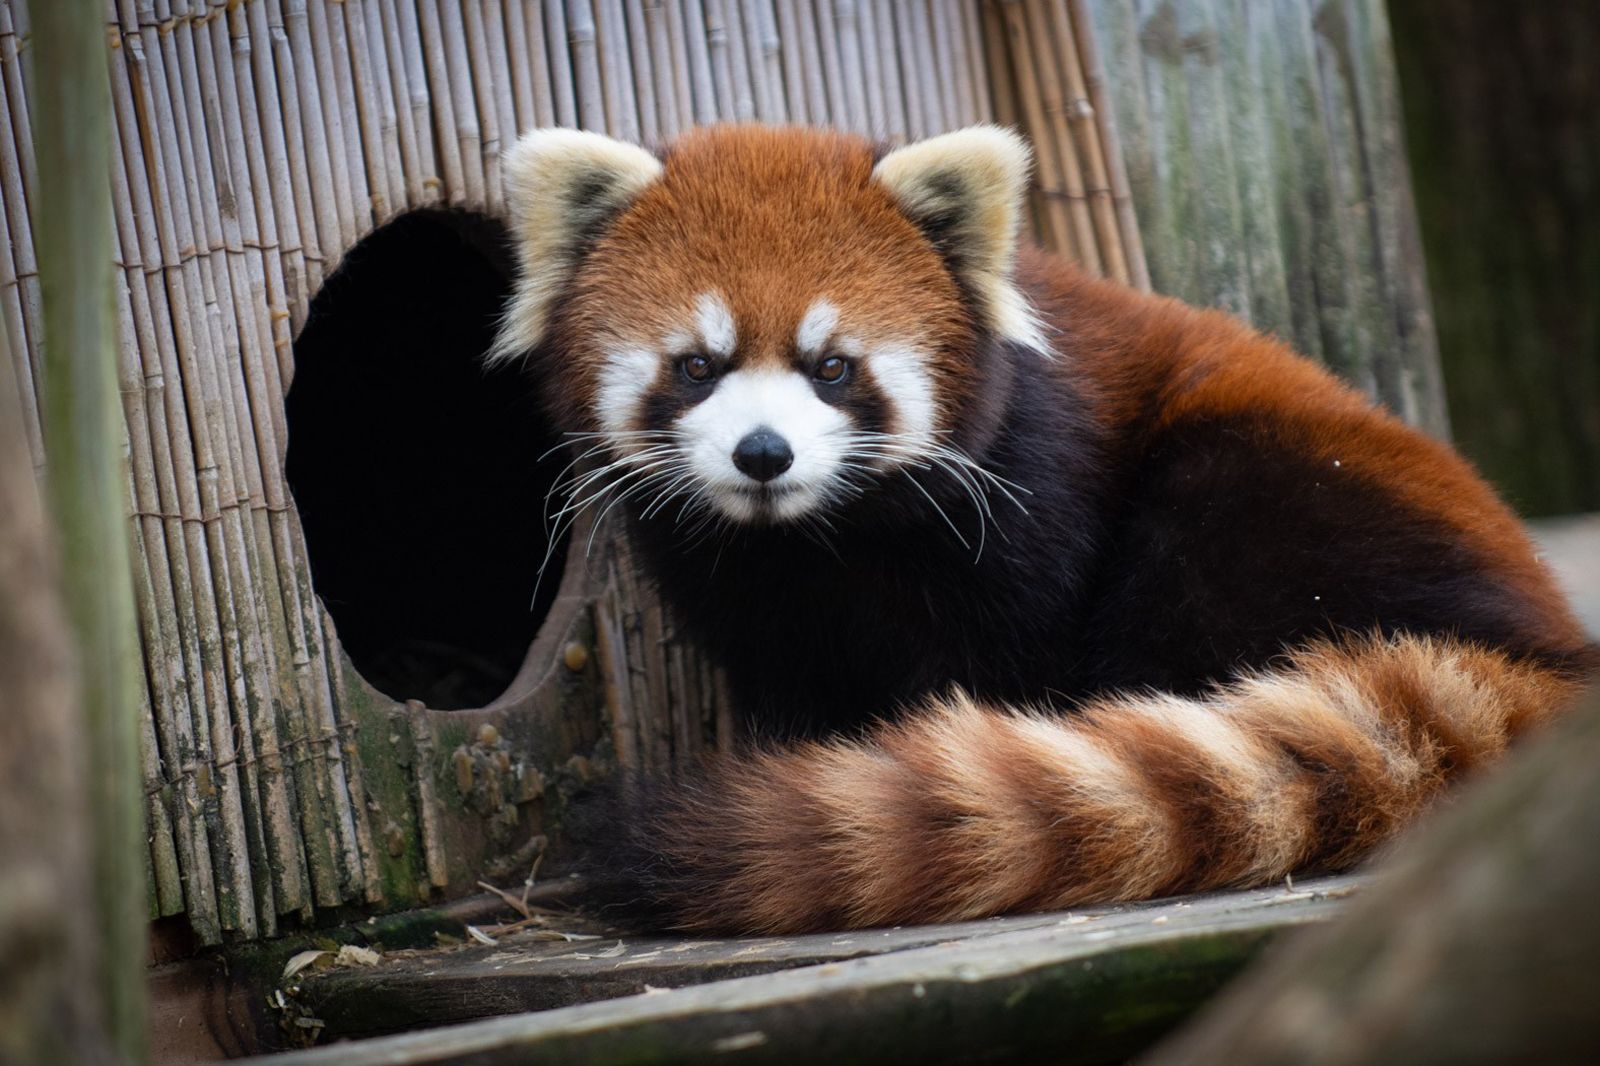 A red panda missing from her habitat at an Ohio zoo has been found